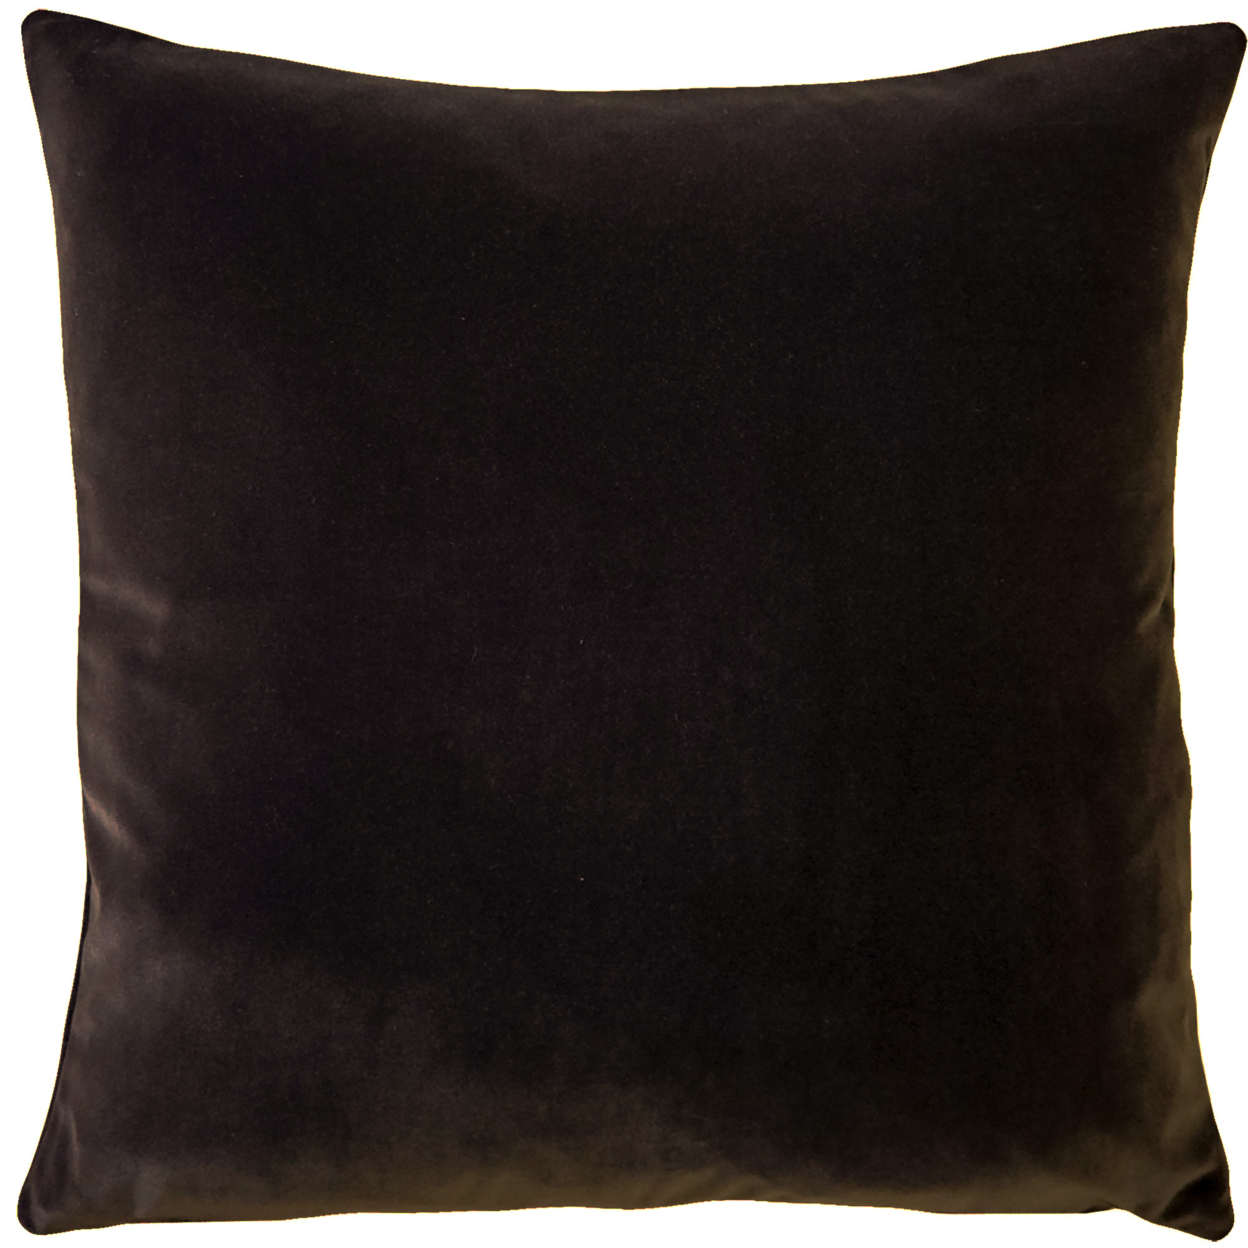 Castello Velvet Throw Pillows, Complete Pillow With Polyfill Pillow Insert (18 Colors, 3 Sizes) - Espresso Brown, 12x20